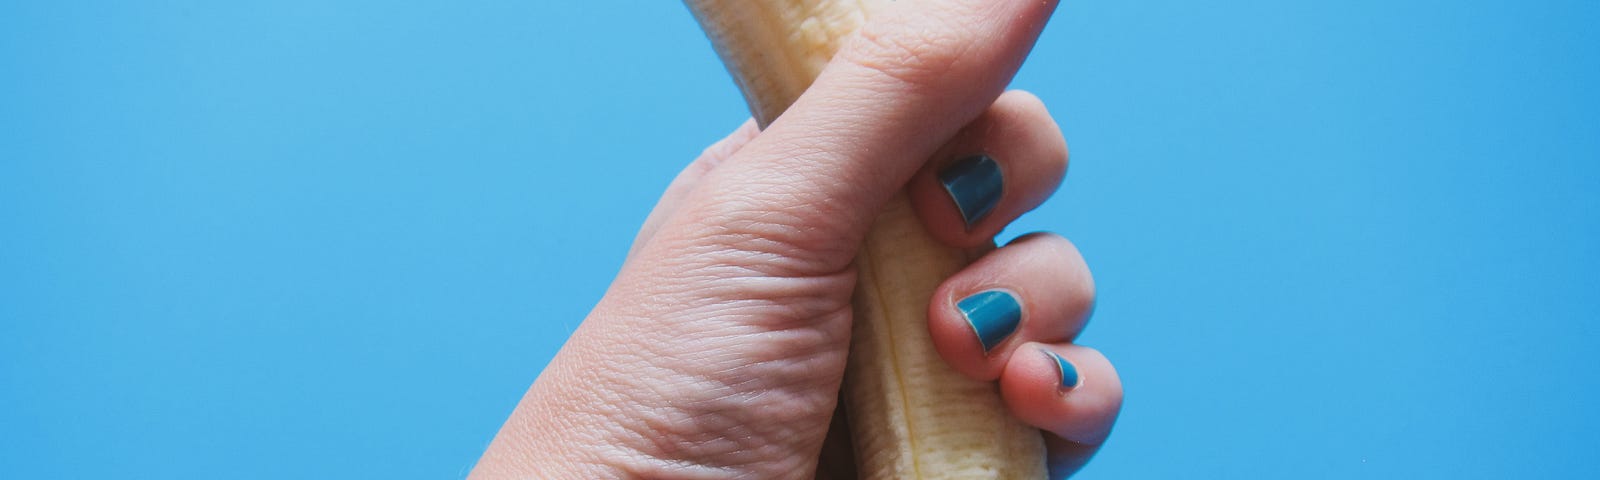 A pink-toned human hand and wrist are visible. There is a hollow star tattoo near the inner wrist. The fingernails are short and painted blue. The hand is clenched around an upright, unpeeled banana. The photo is taken against a blue backdrop.